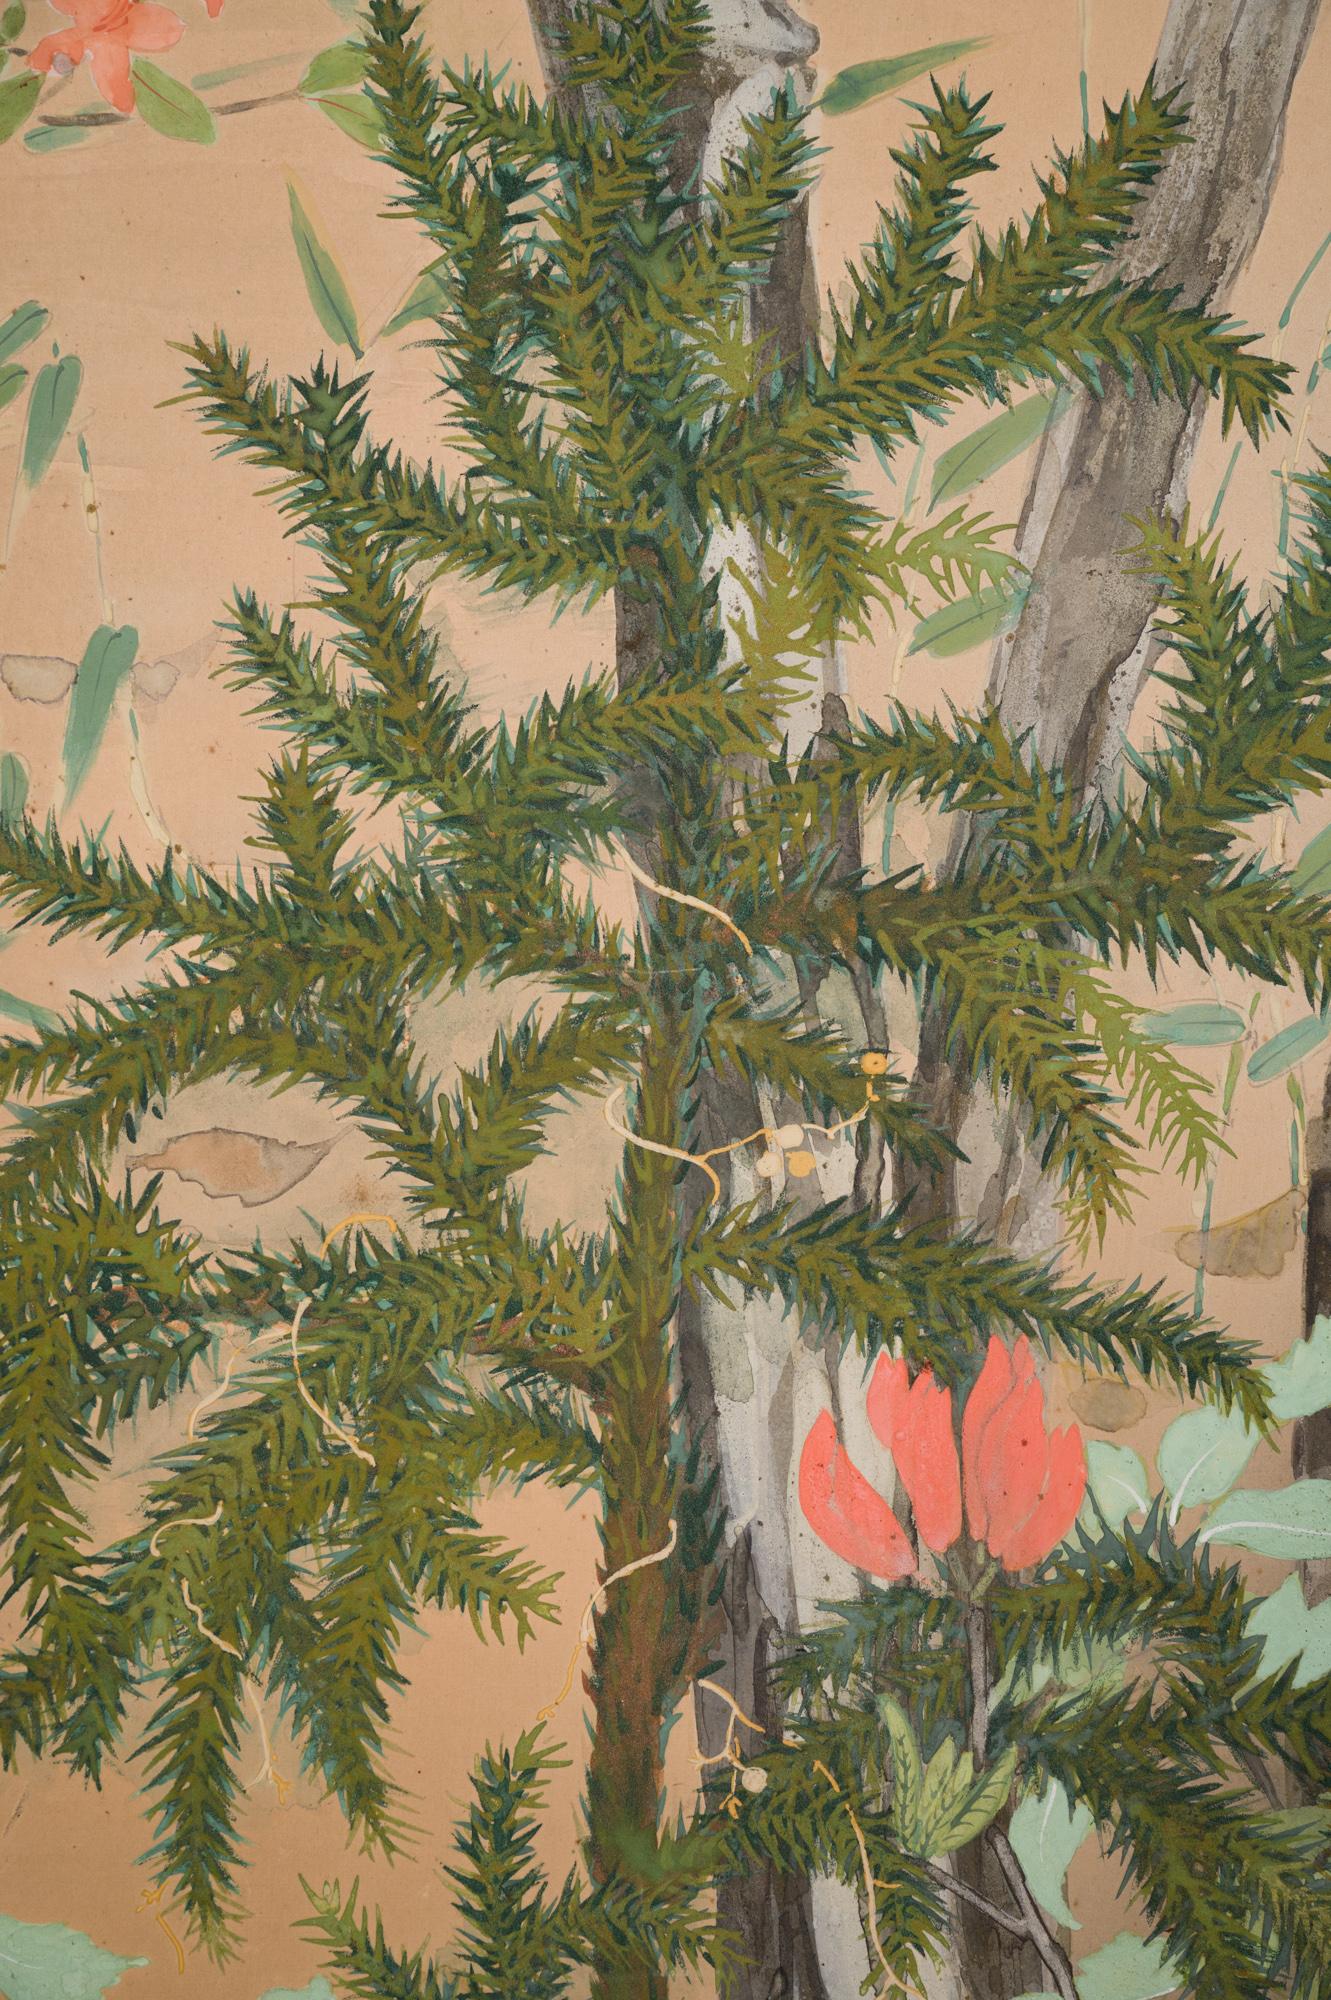 Lovely trees with pine and azelea. Mineral pigment on paper. Showa period (1926-1989).